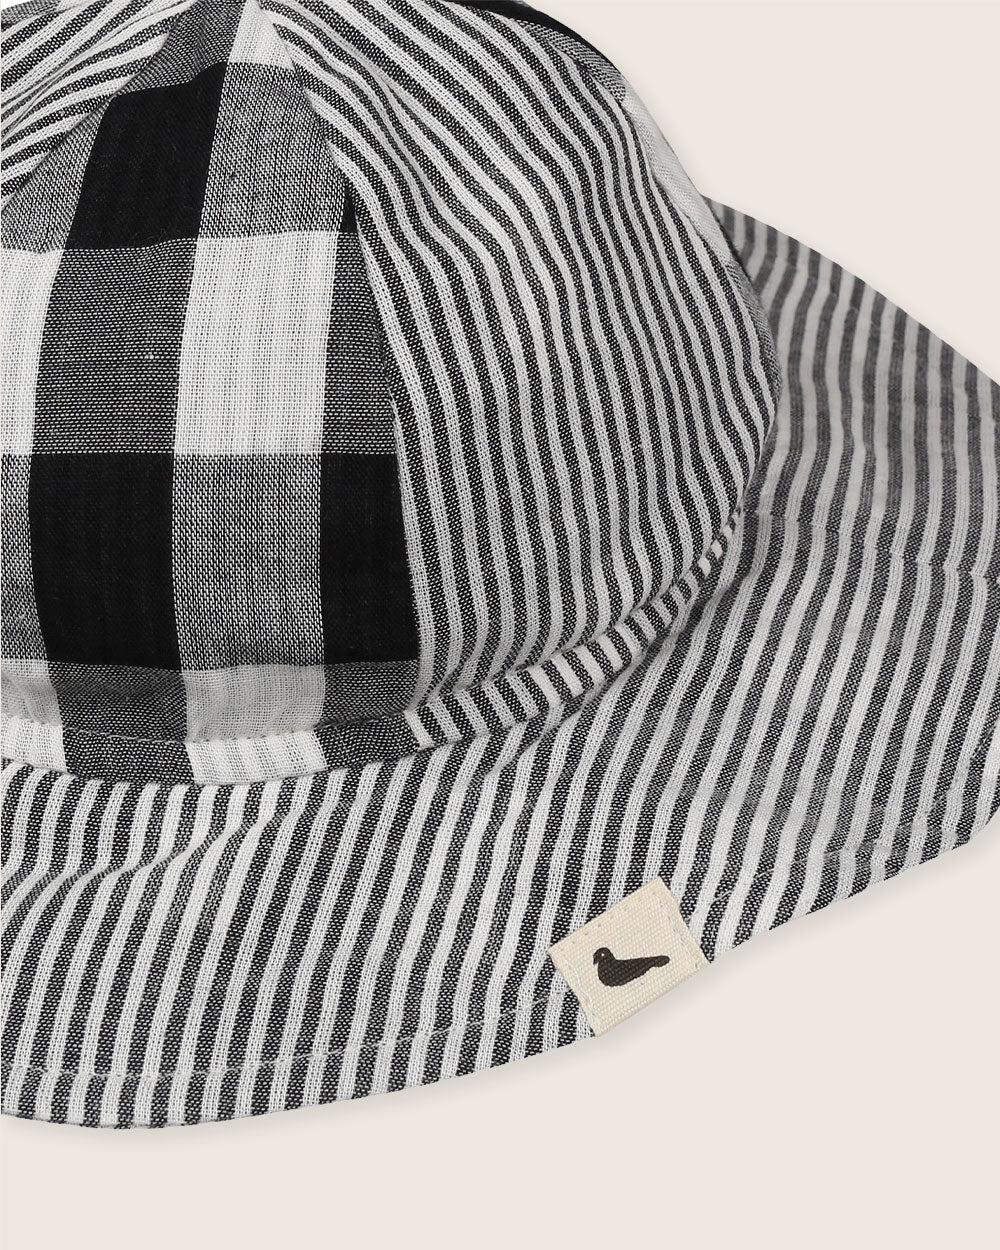 Check and stripe organic cotton baby hat